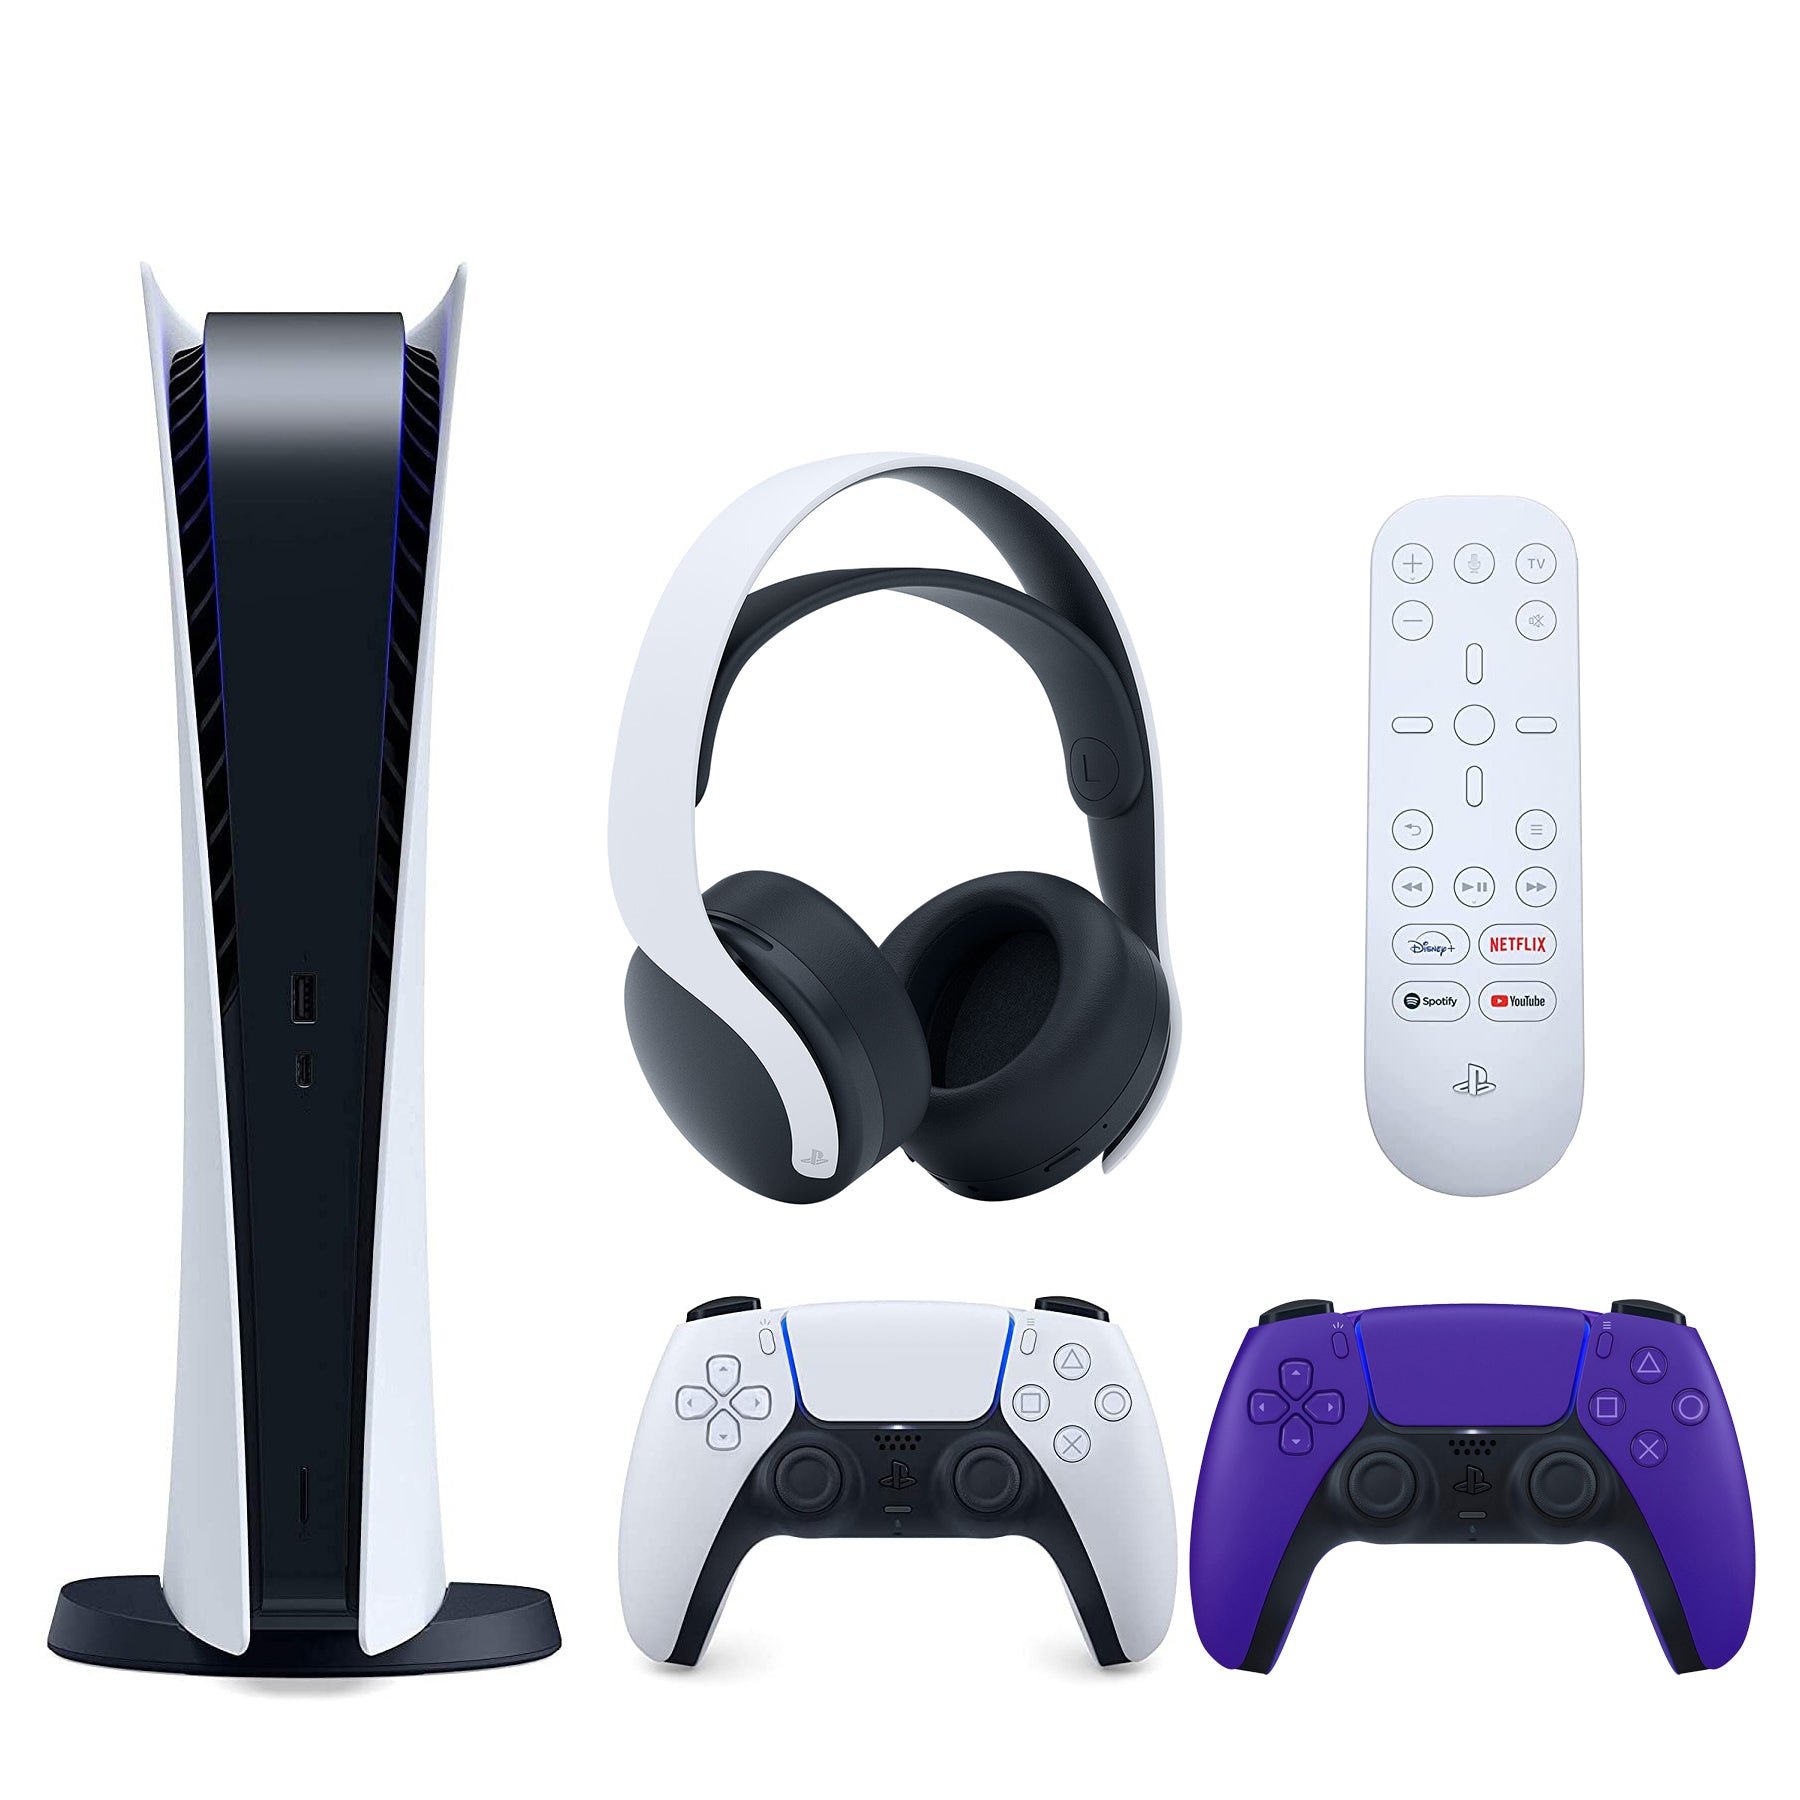 Sony Playstation 5 Digital Version (Sony PS5 Digital) with Extra Galactic Purple Controller, White PULSE 3D Headset and Media Remote Bundle - Pro-Distributing